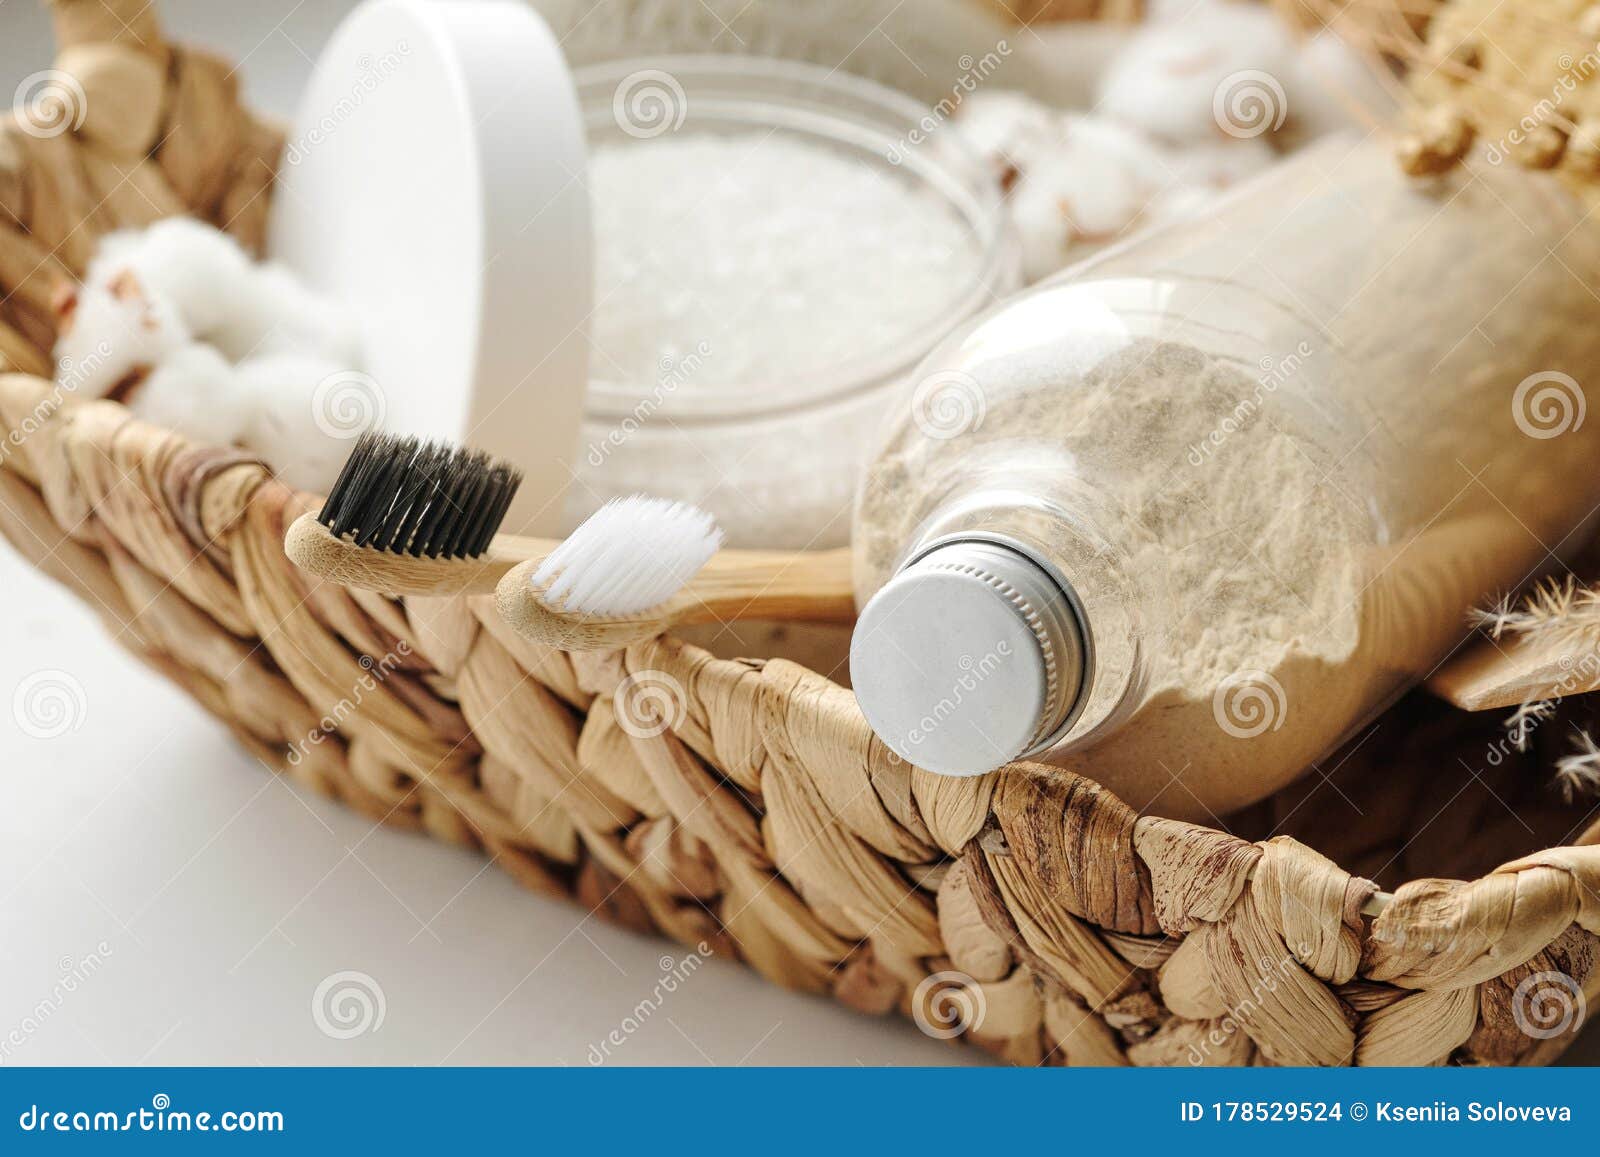 Spa and Wellness Cosmetic Products:body Scrub,beech Toothbrushes,sea Bath  Salt,soap, Wooden Hair Comb in a Wicker Basket Stock Photo - Image of  nature, beauty: 178529524